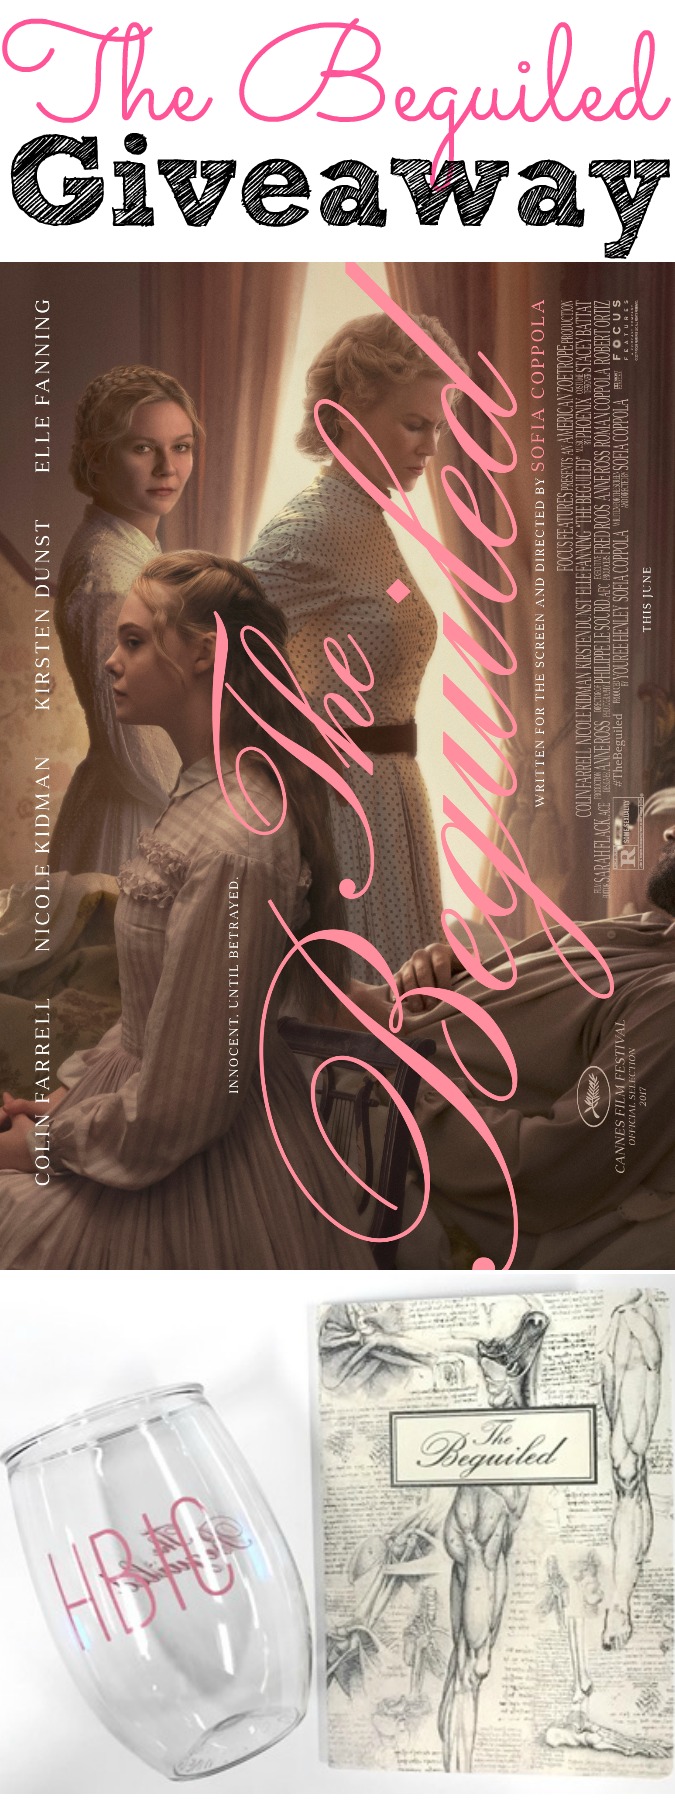 The Beguiled Movie Giveaway #VengefulB*tches - abccreativelearning.com